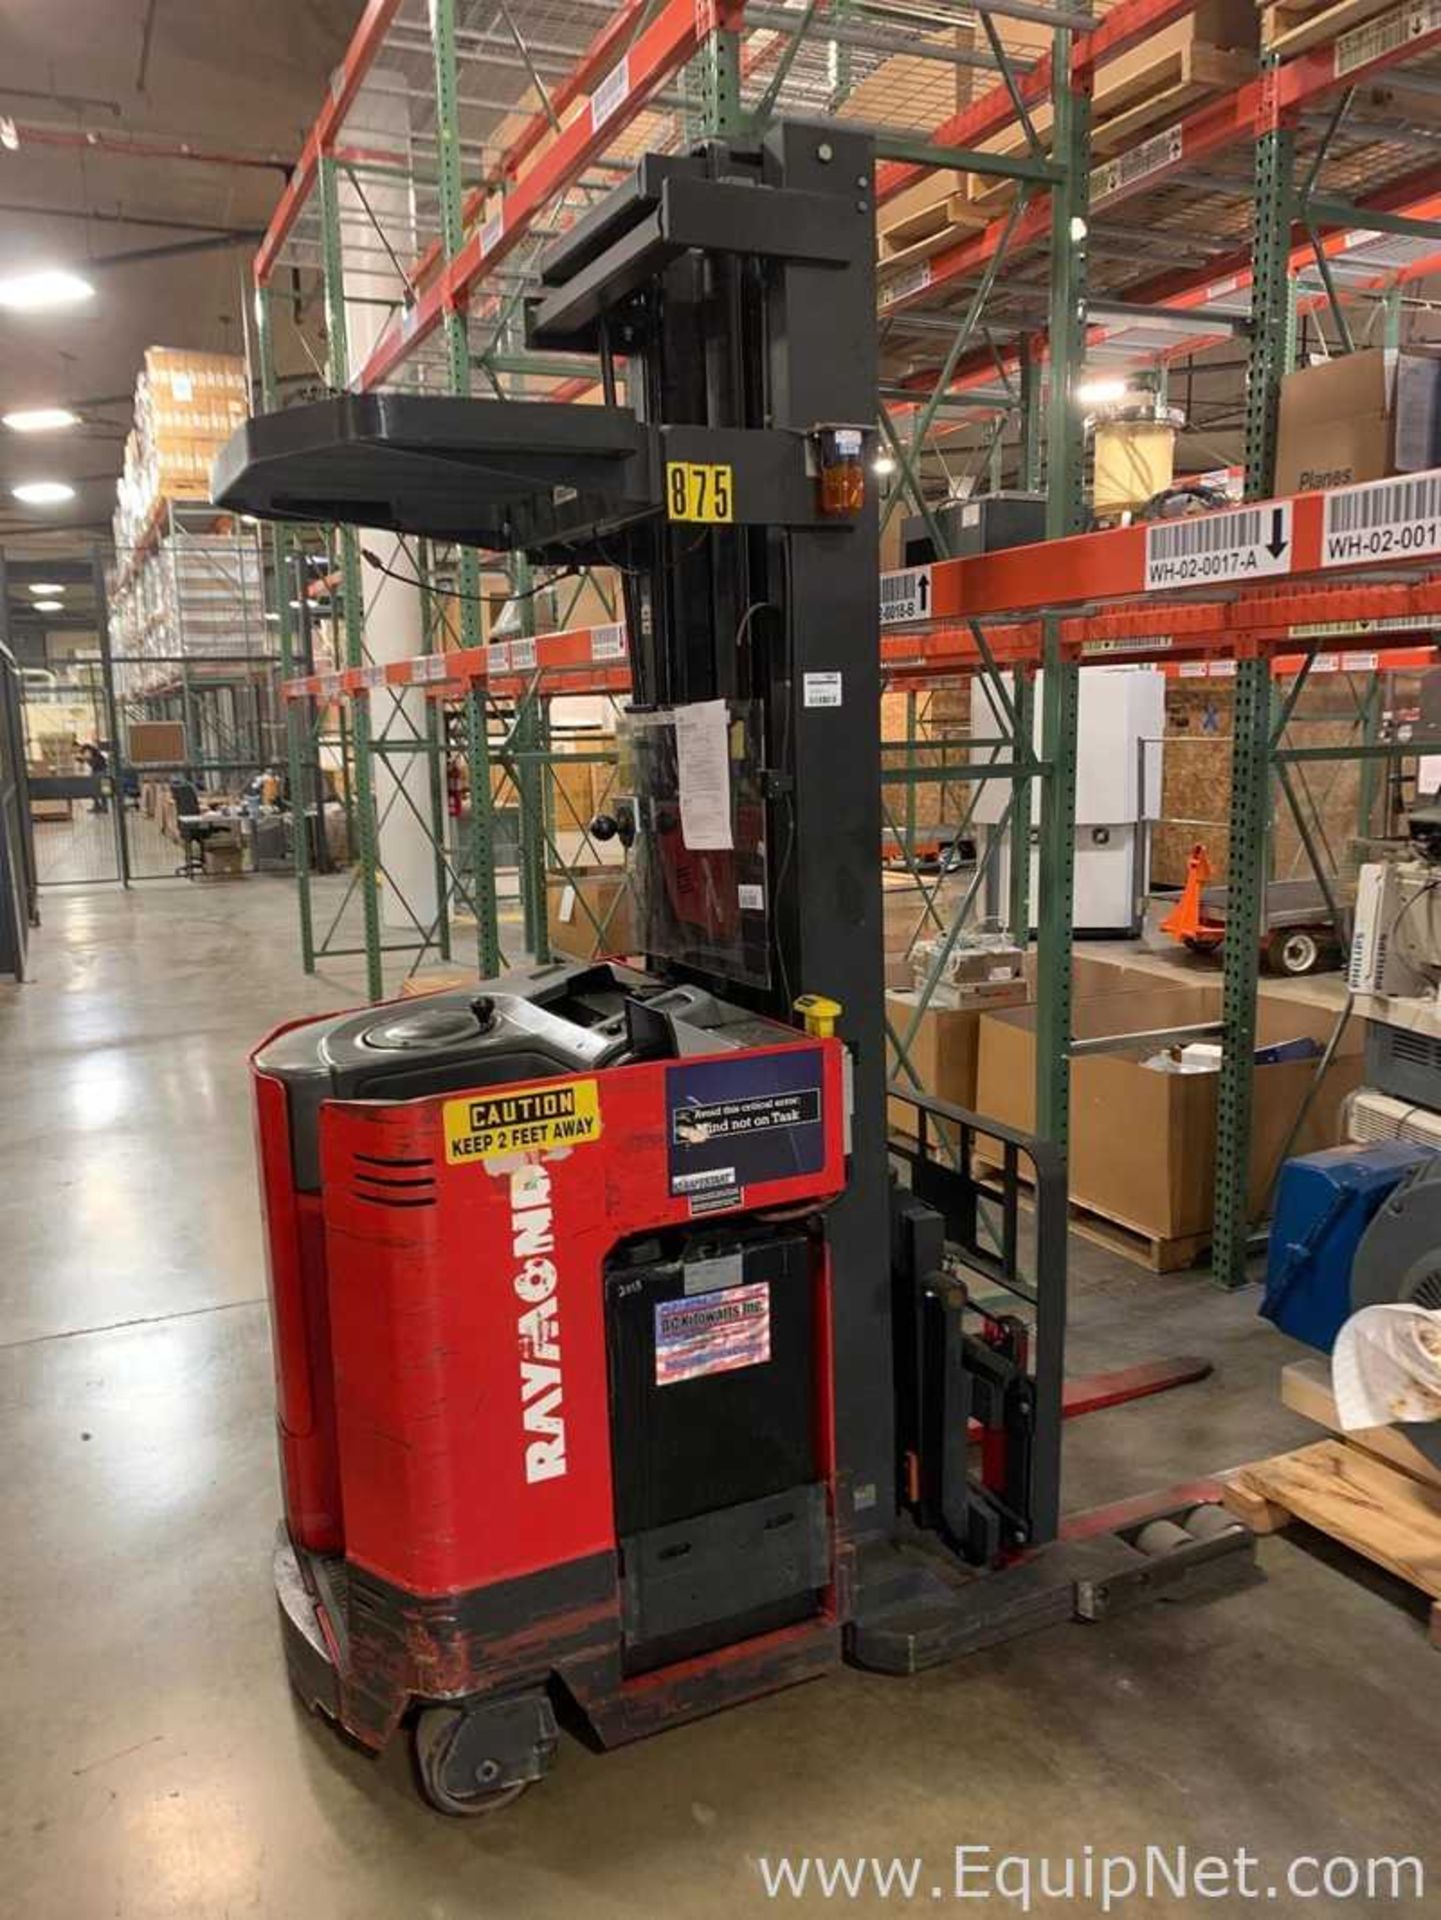 Raymond EASI Stand Up Reach Electric Fork Lift Truck - 875 - Image 2 of 8